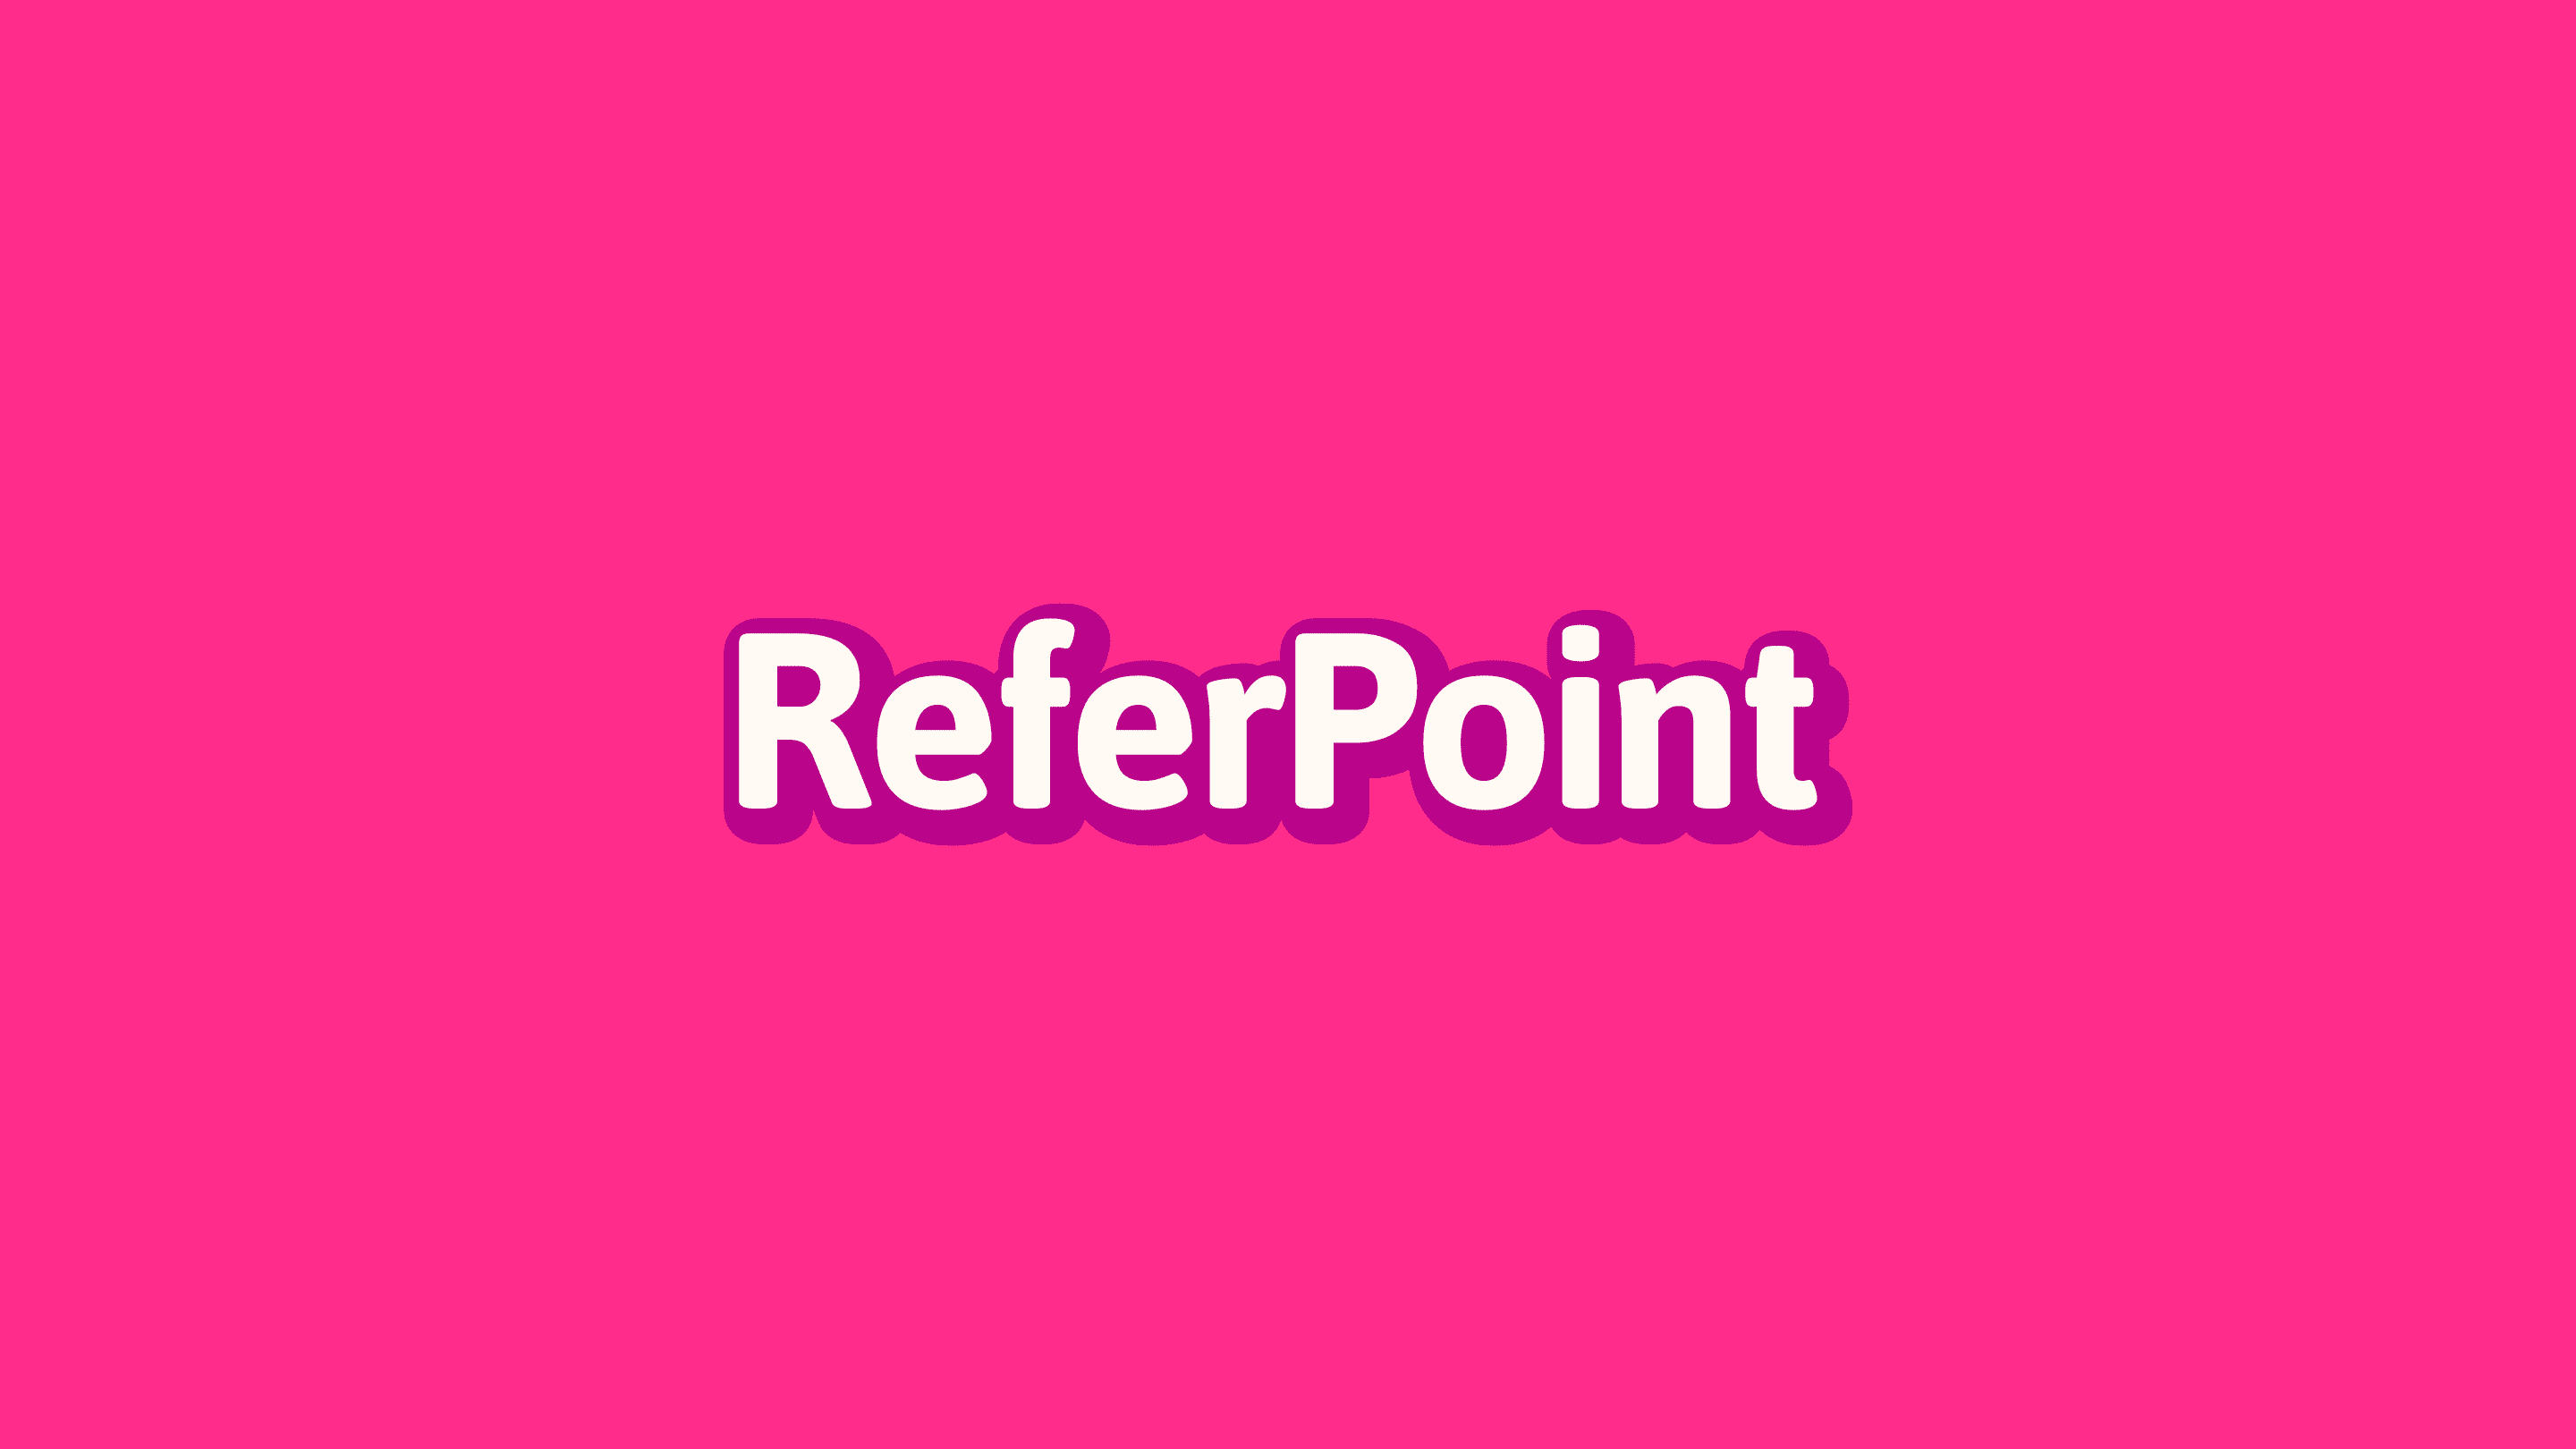 ReferPoint